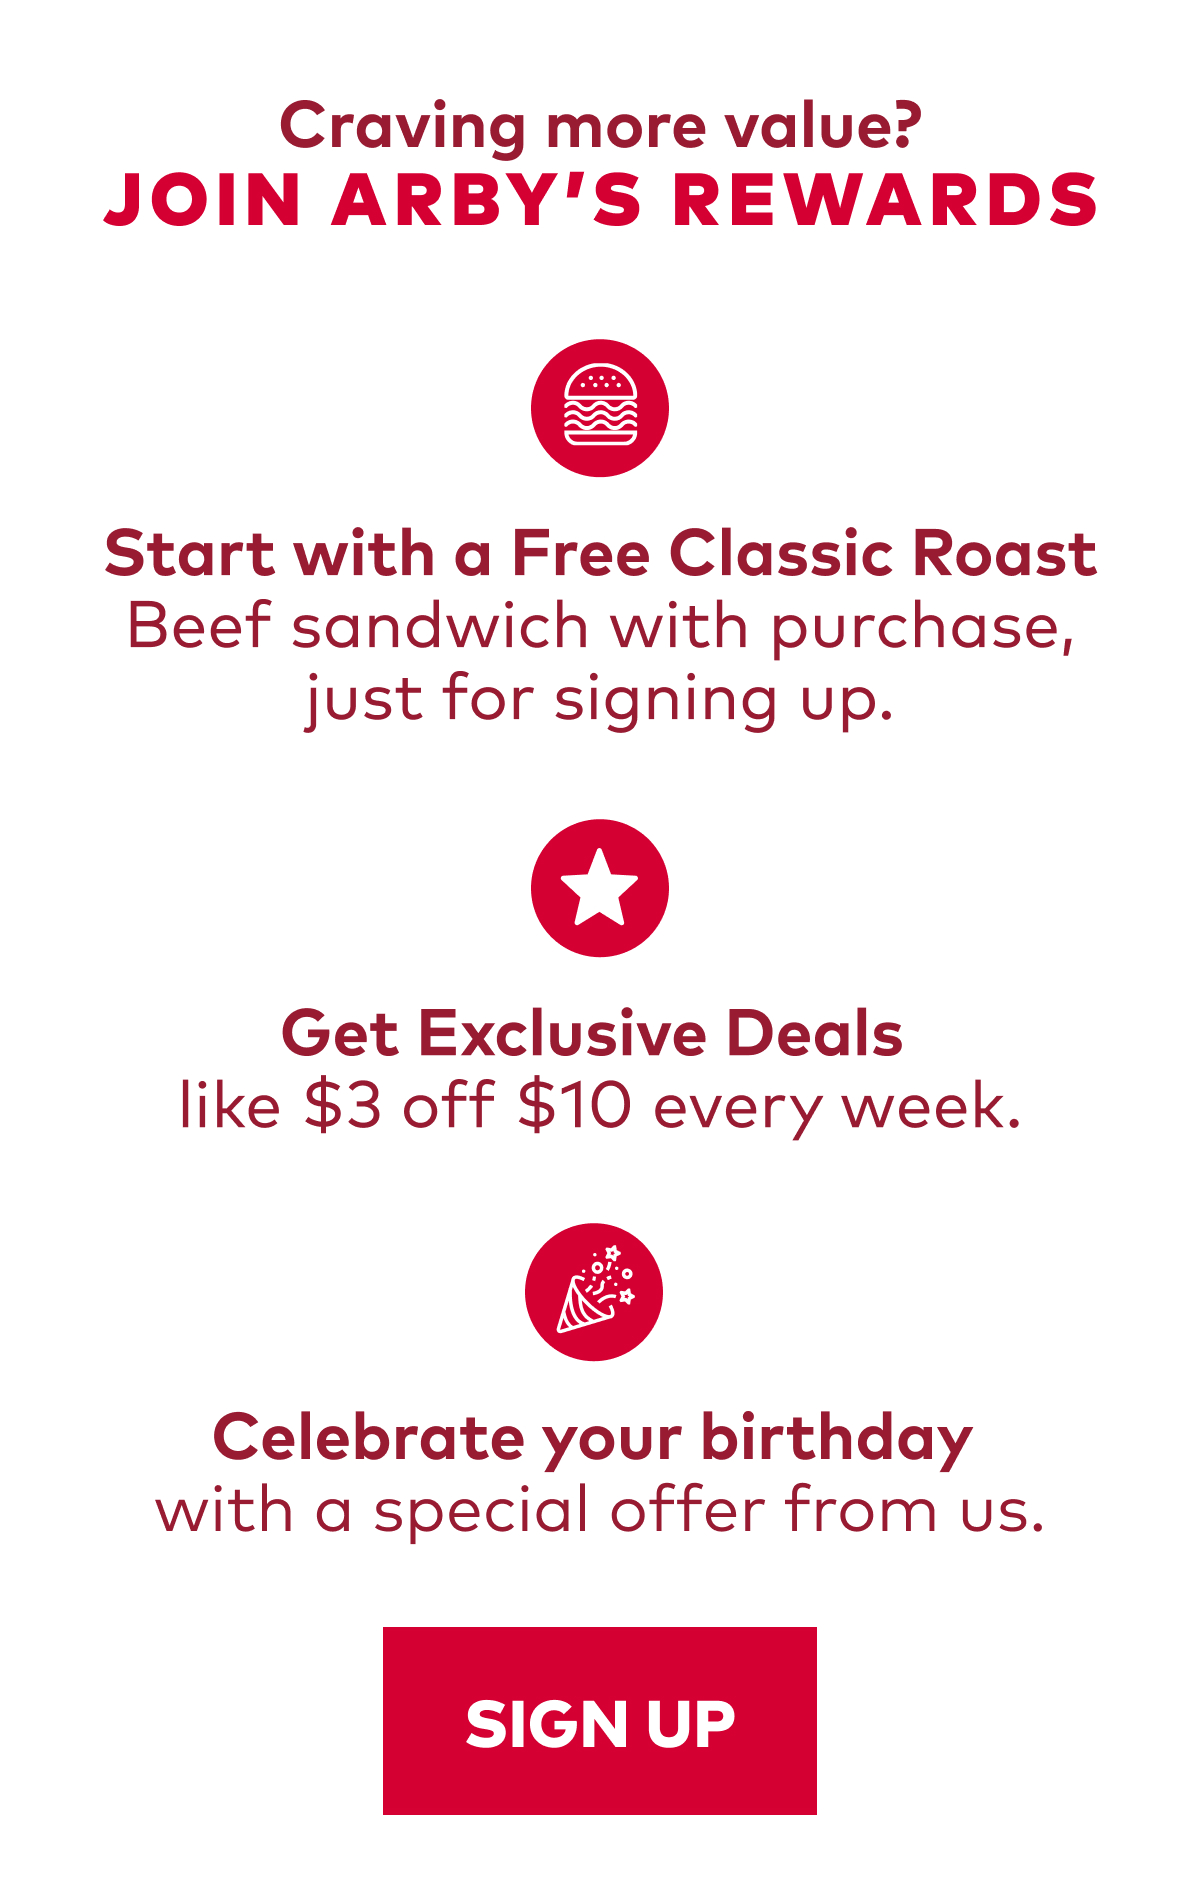 Join Arby's Rewards today for exclusive deals, sneak peeks, birthday surprises, and more.